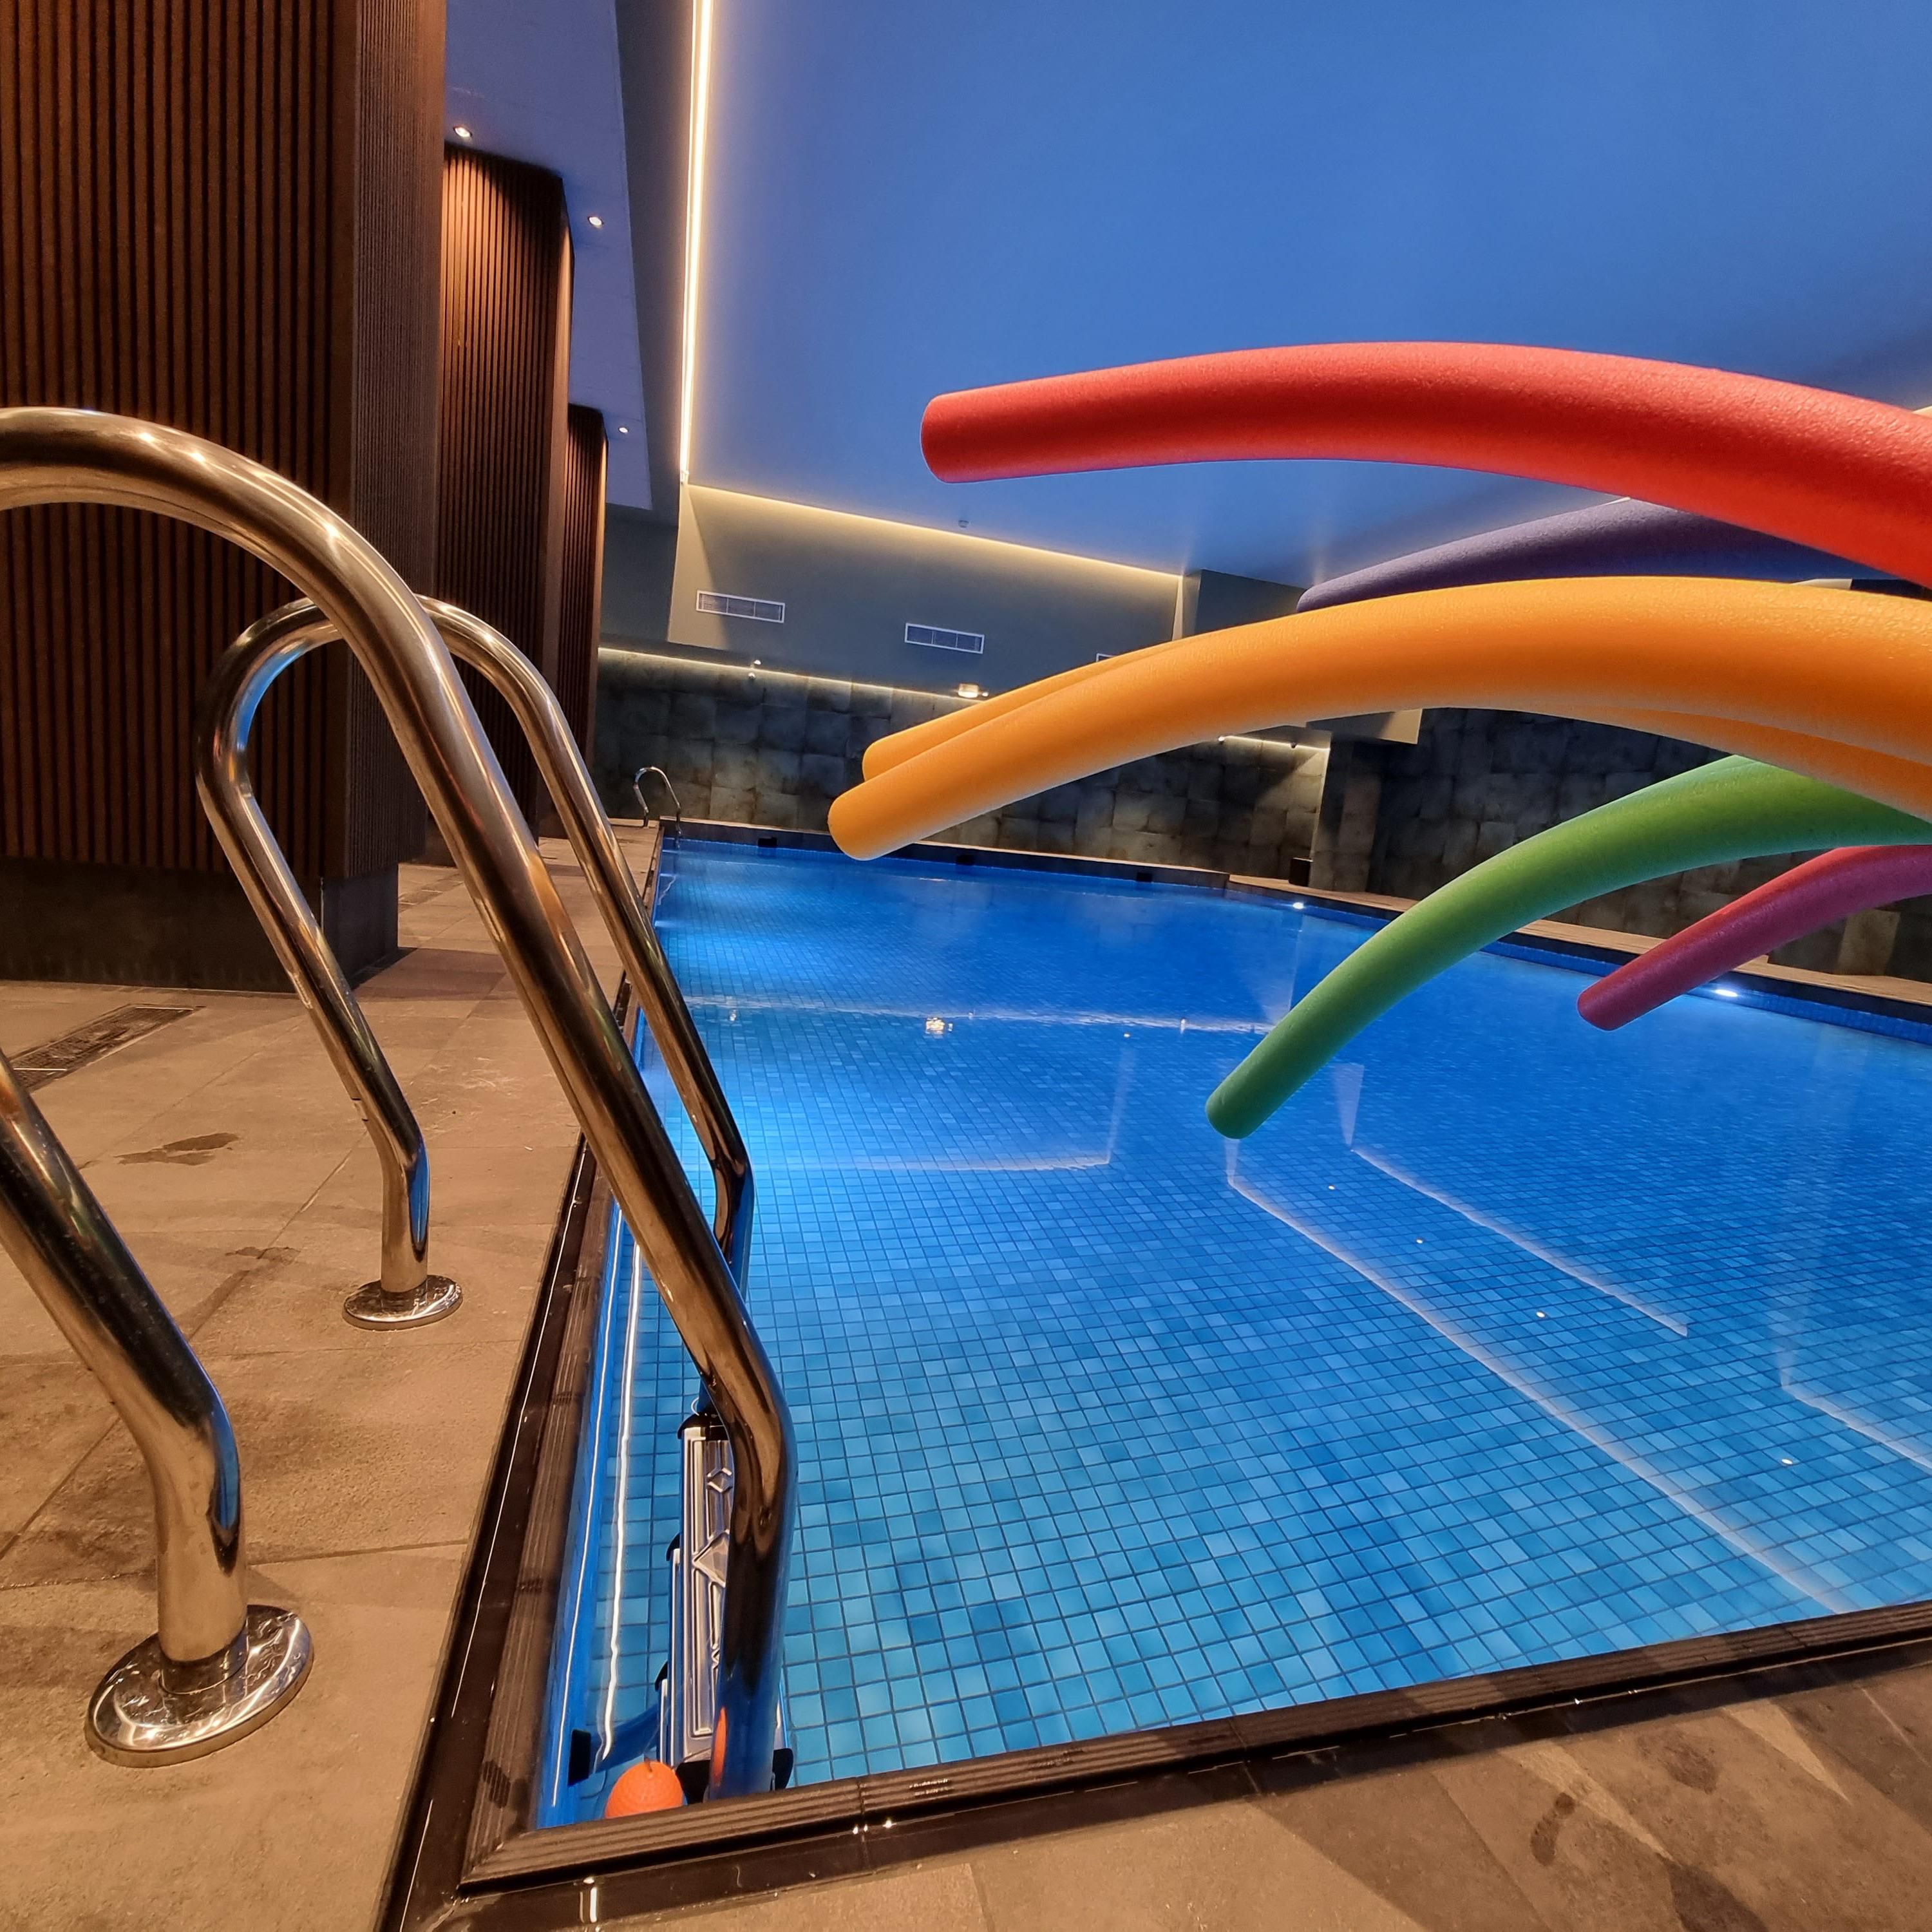 Have a relaxing swim or try water walking - our pool is ready for 